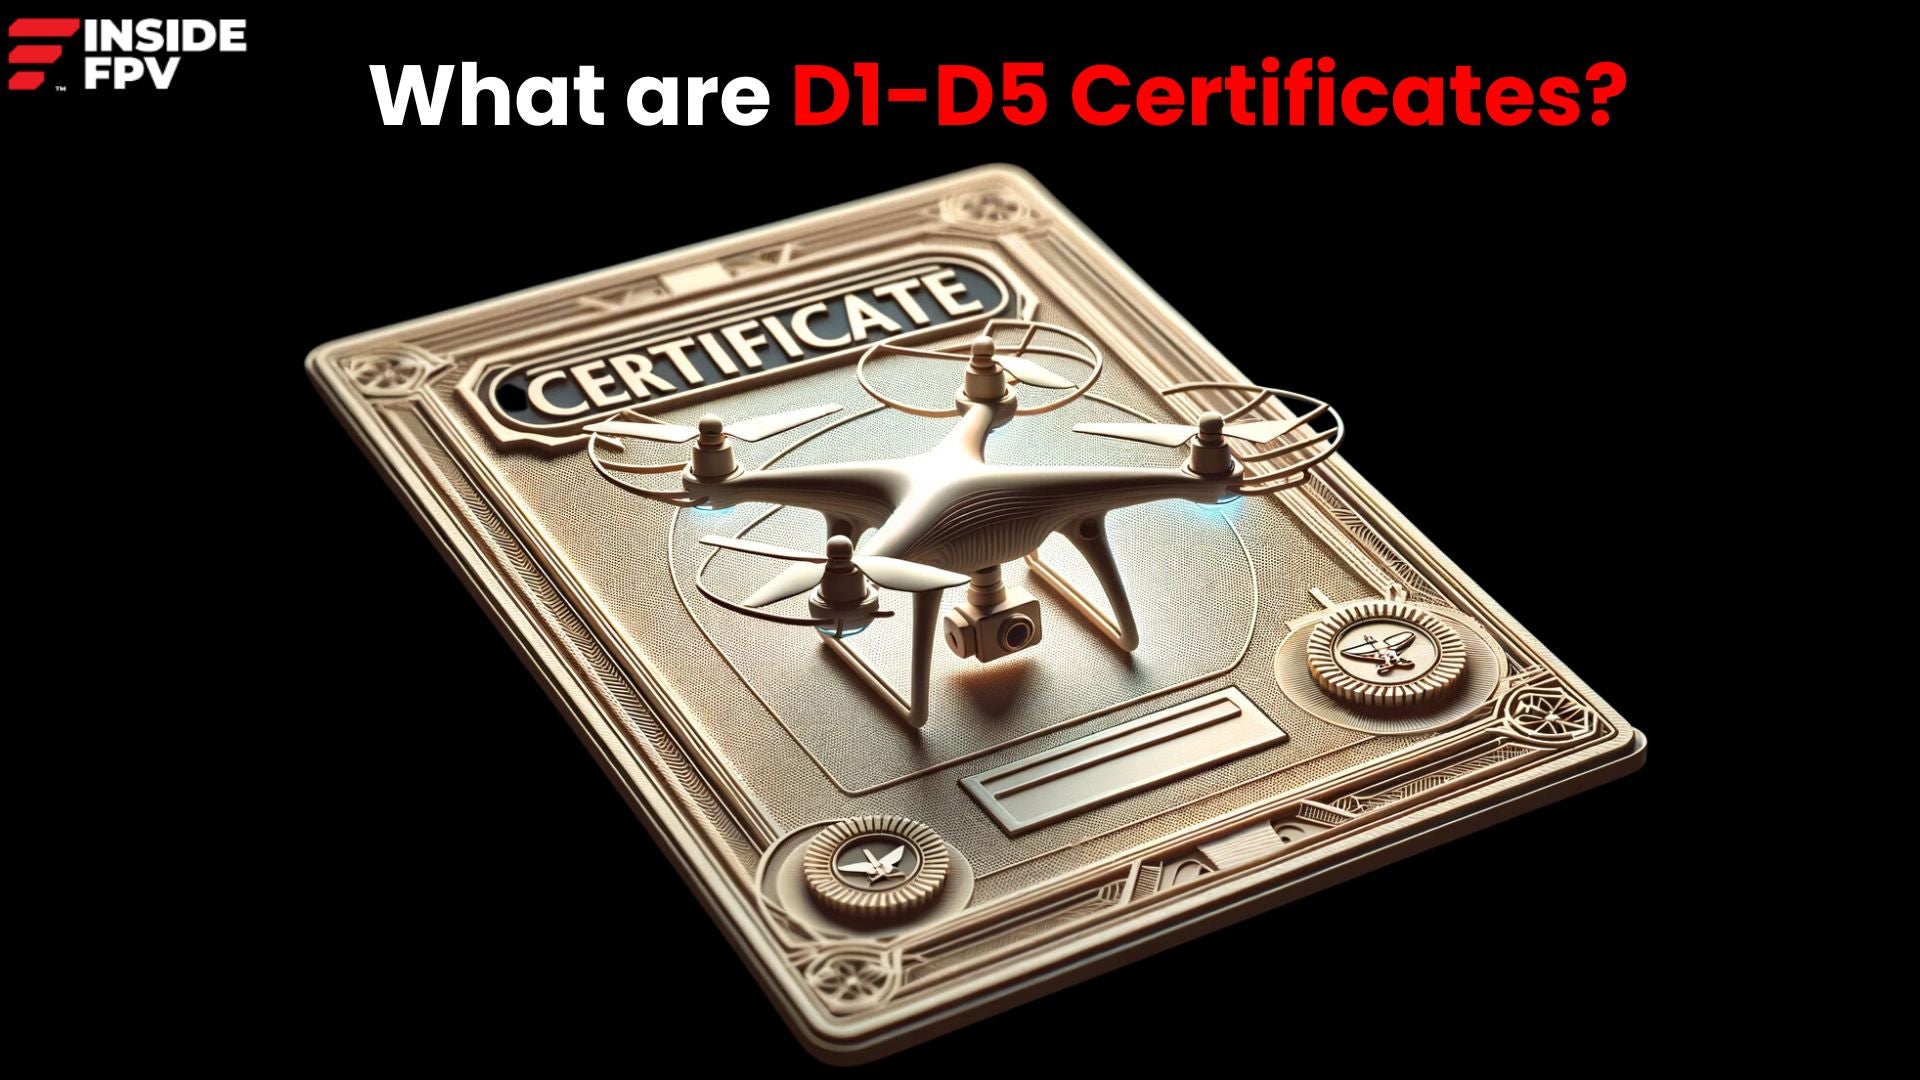 What are D1-D5 Certificates?